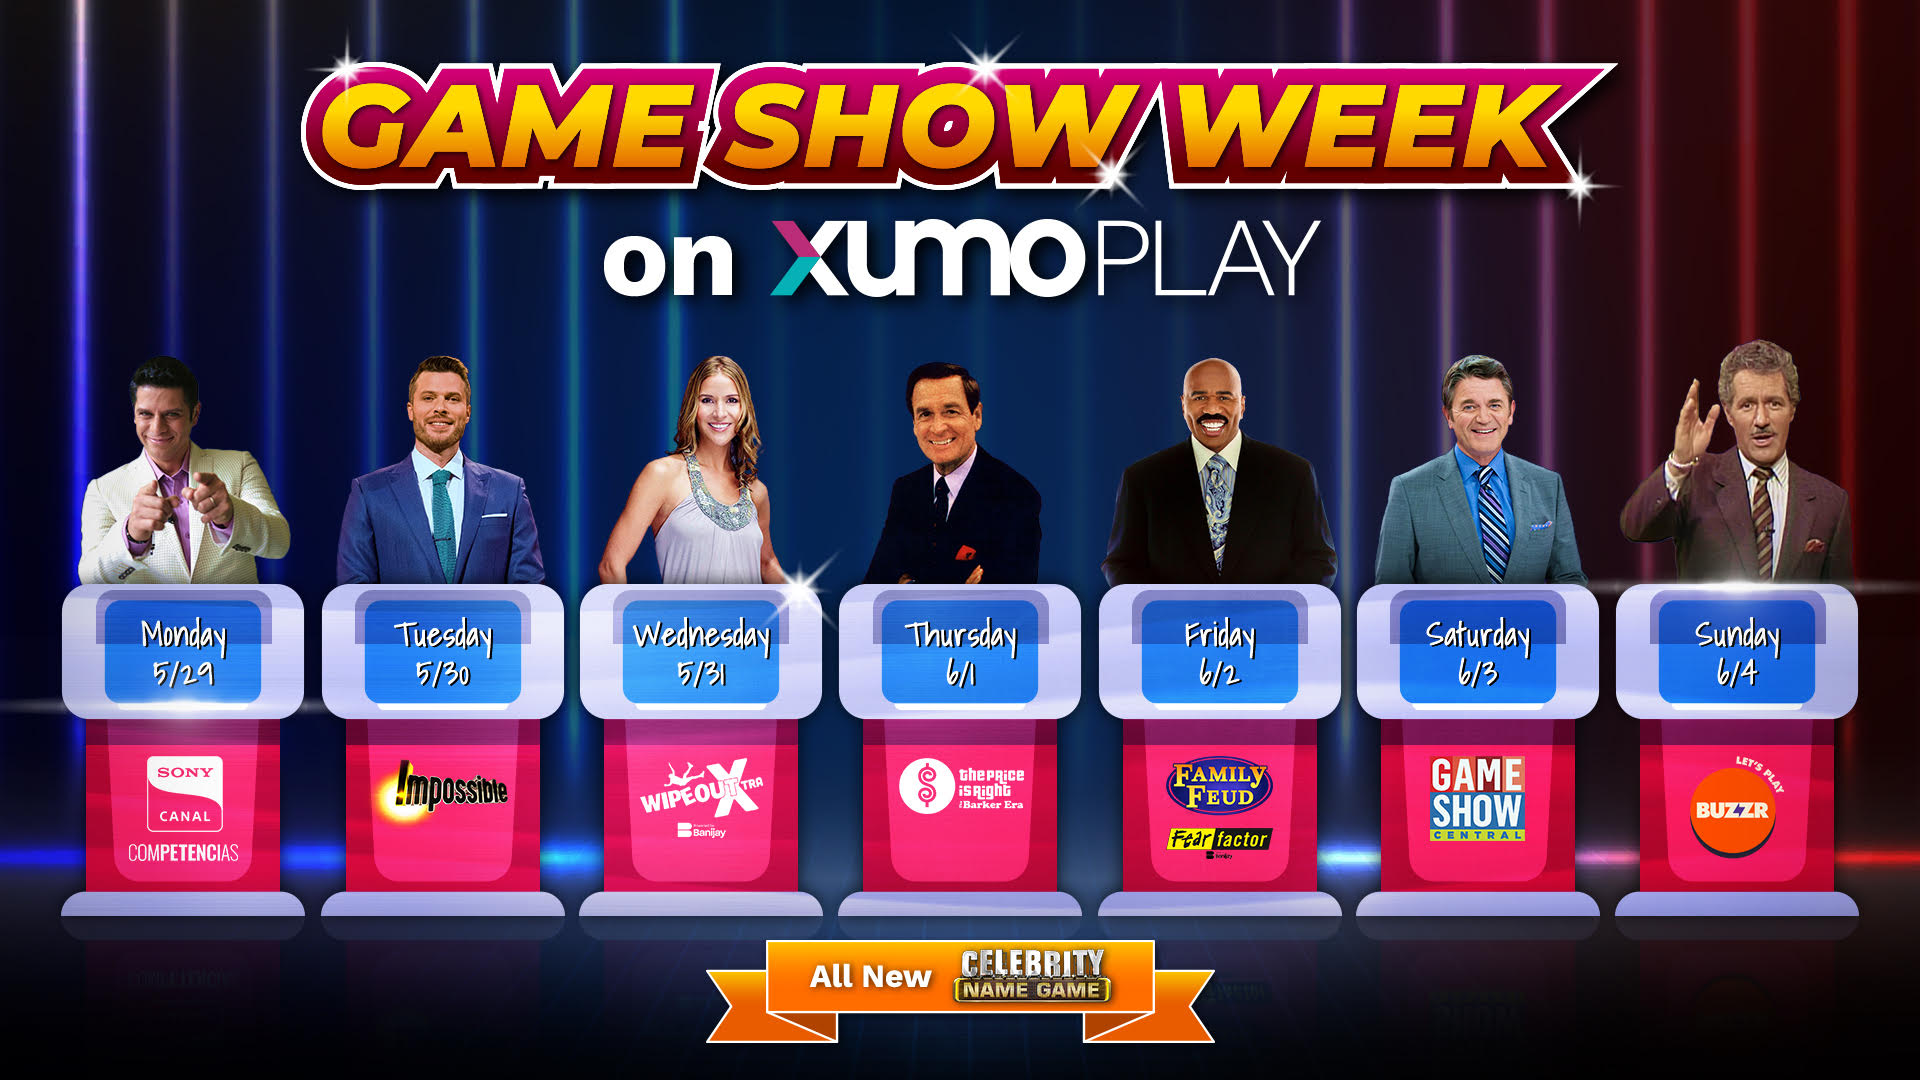 The Free Streaming Service Xumo Play Announces Its 3rd Annual Game Show Week With 13 Channels Full of Game Shows